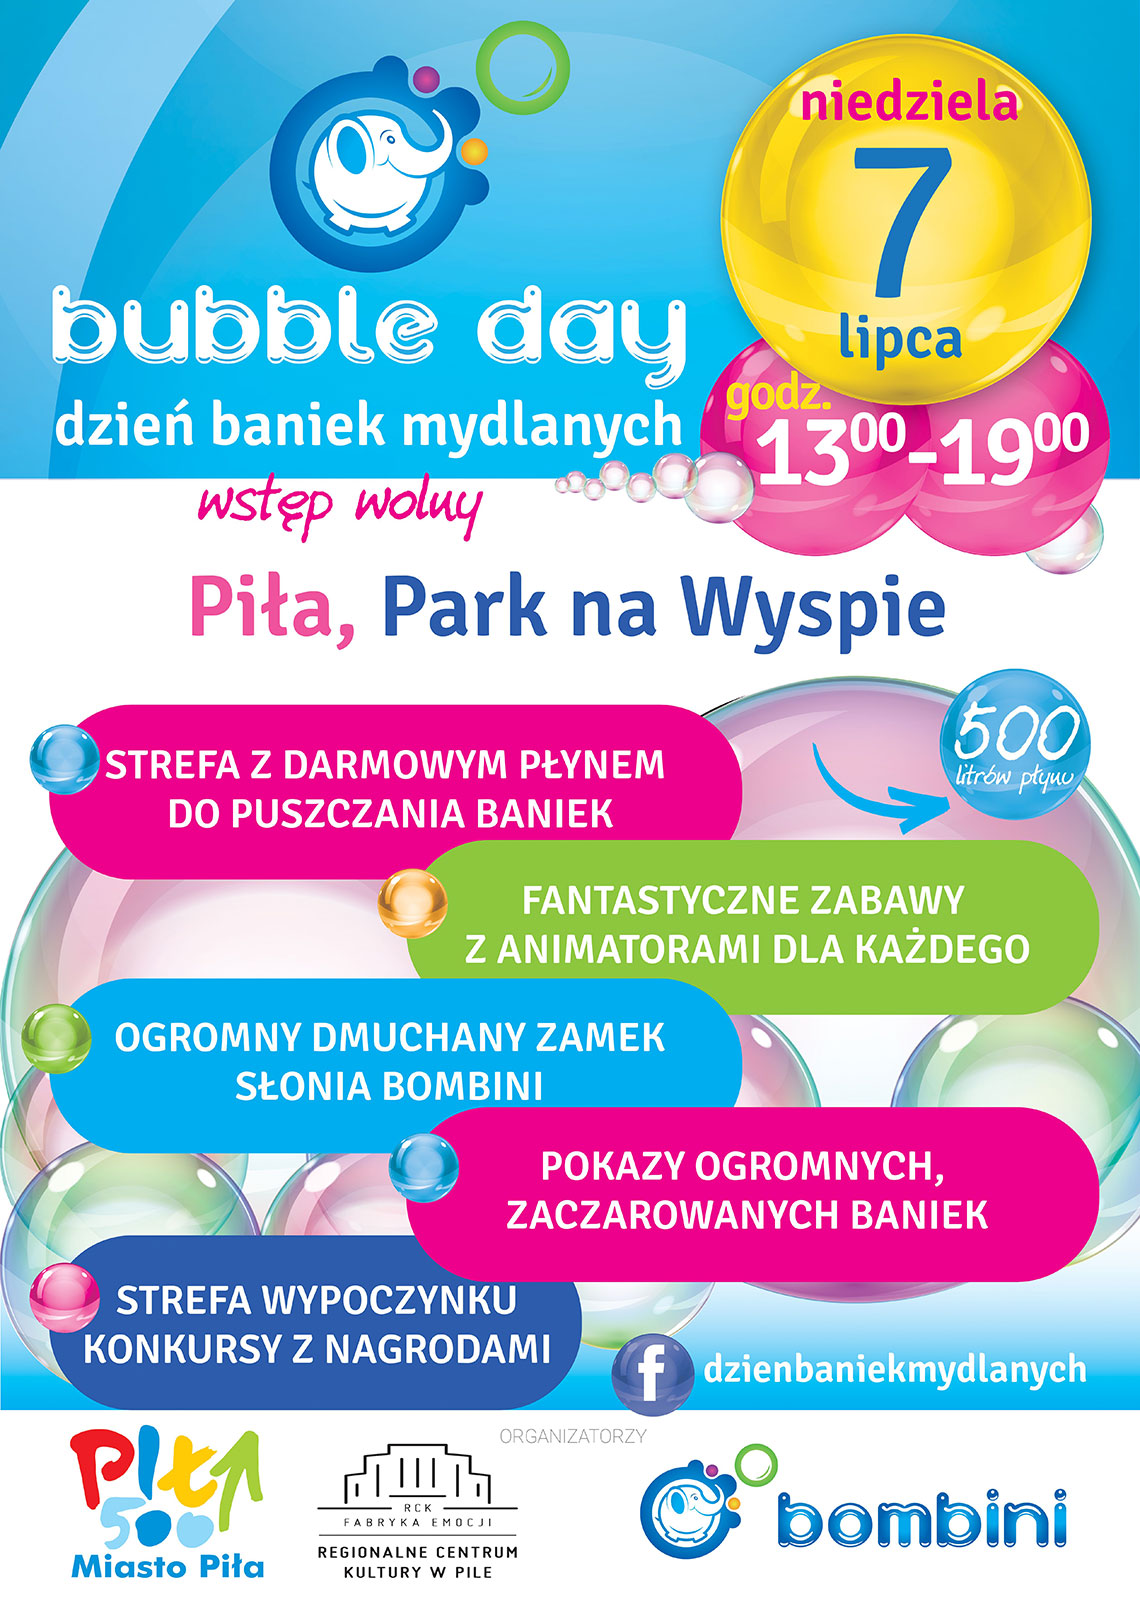 bubble day